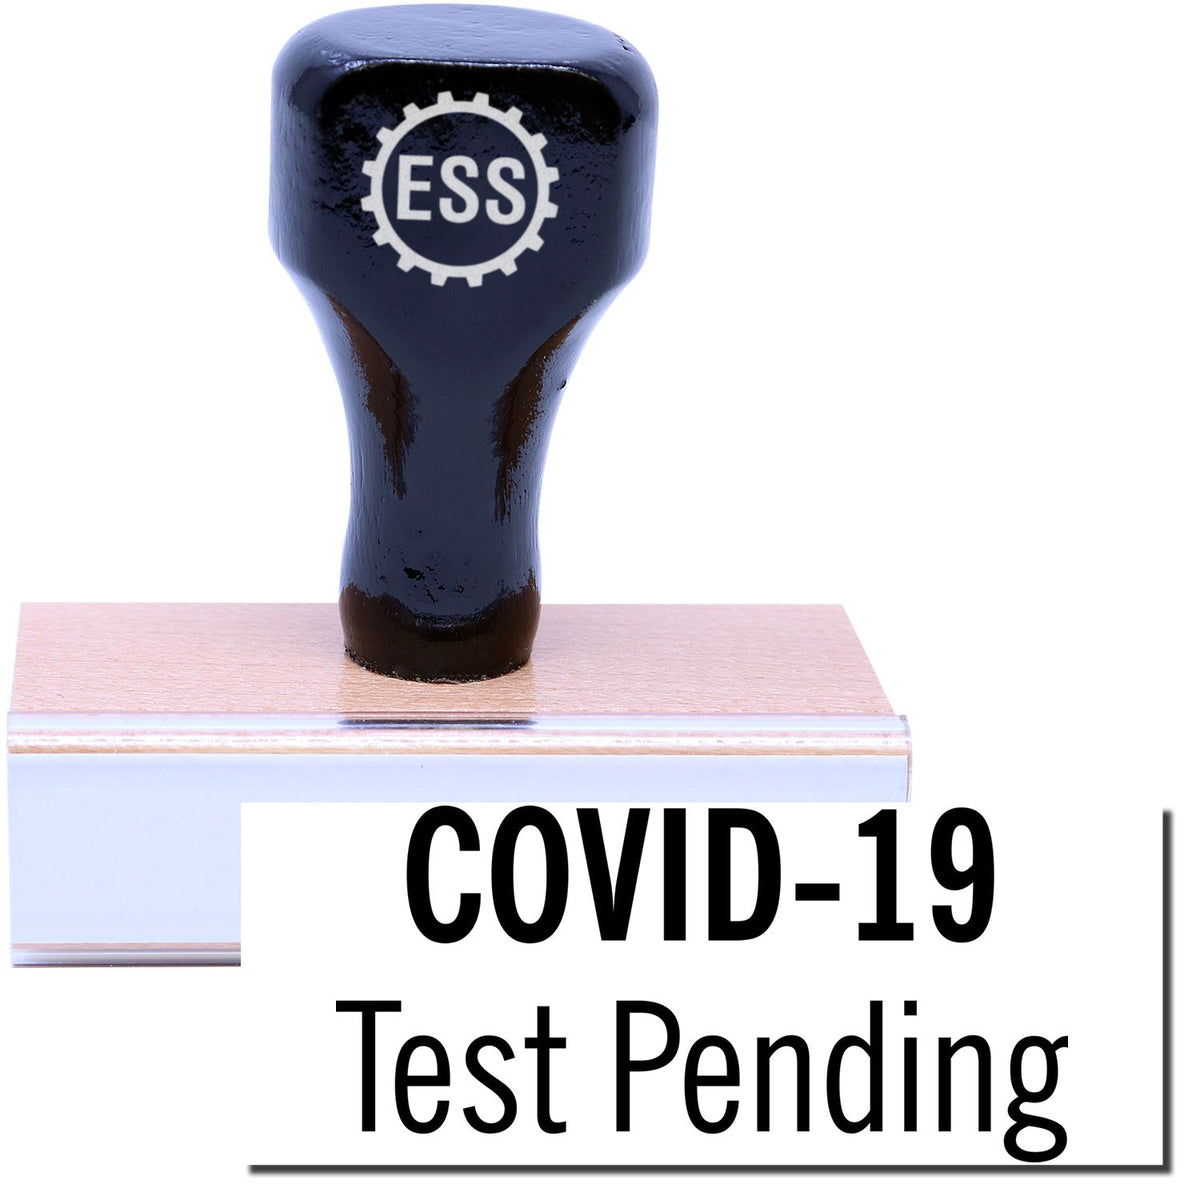 A stock office rubber stamp with a stamped image showing how the text &quot;COVID-19 Test Pending&quot; is displayed after stamping.